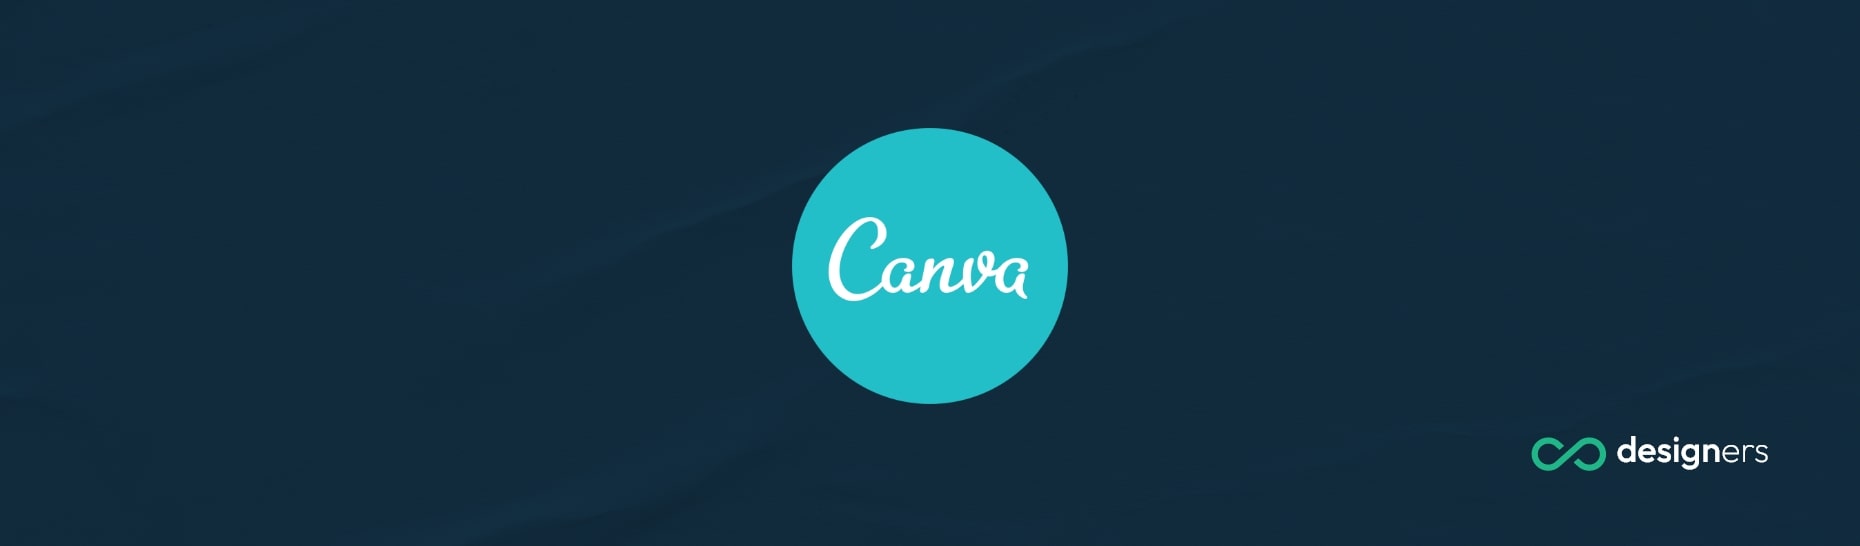 Why Is Canva So Slow Today?